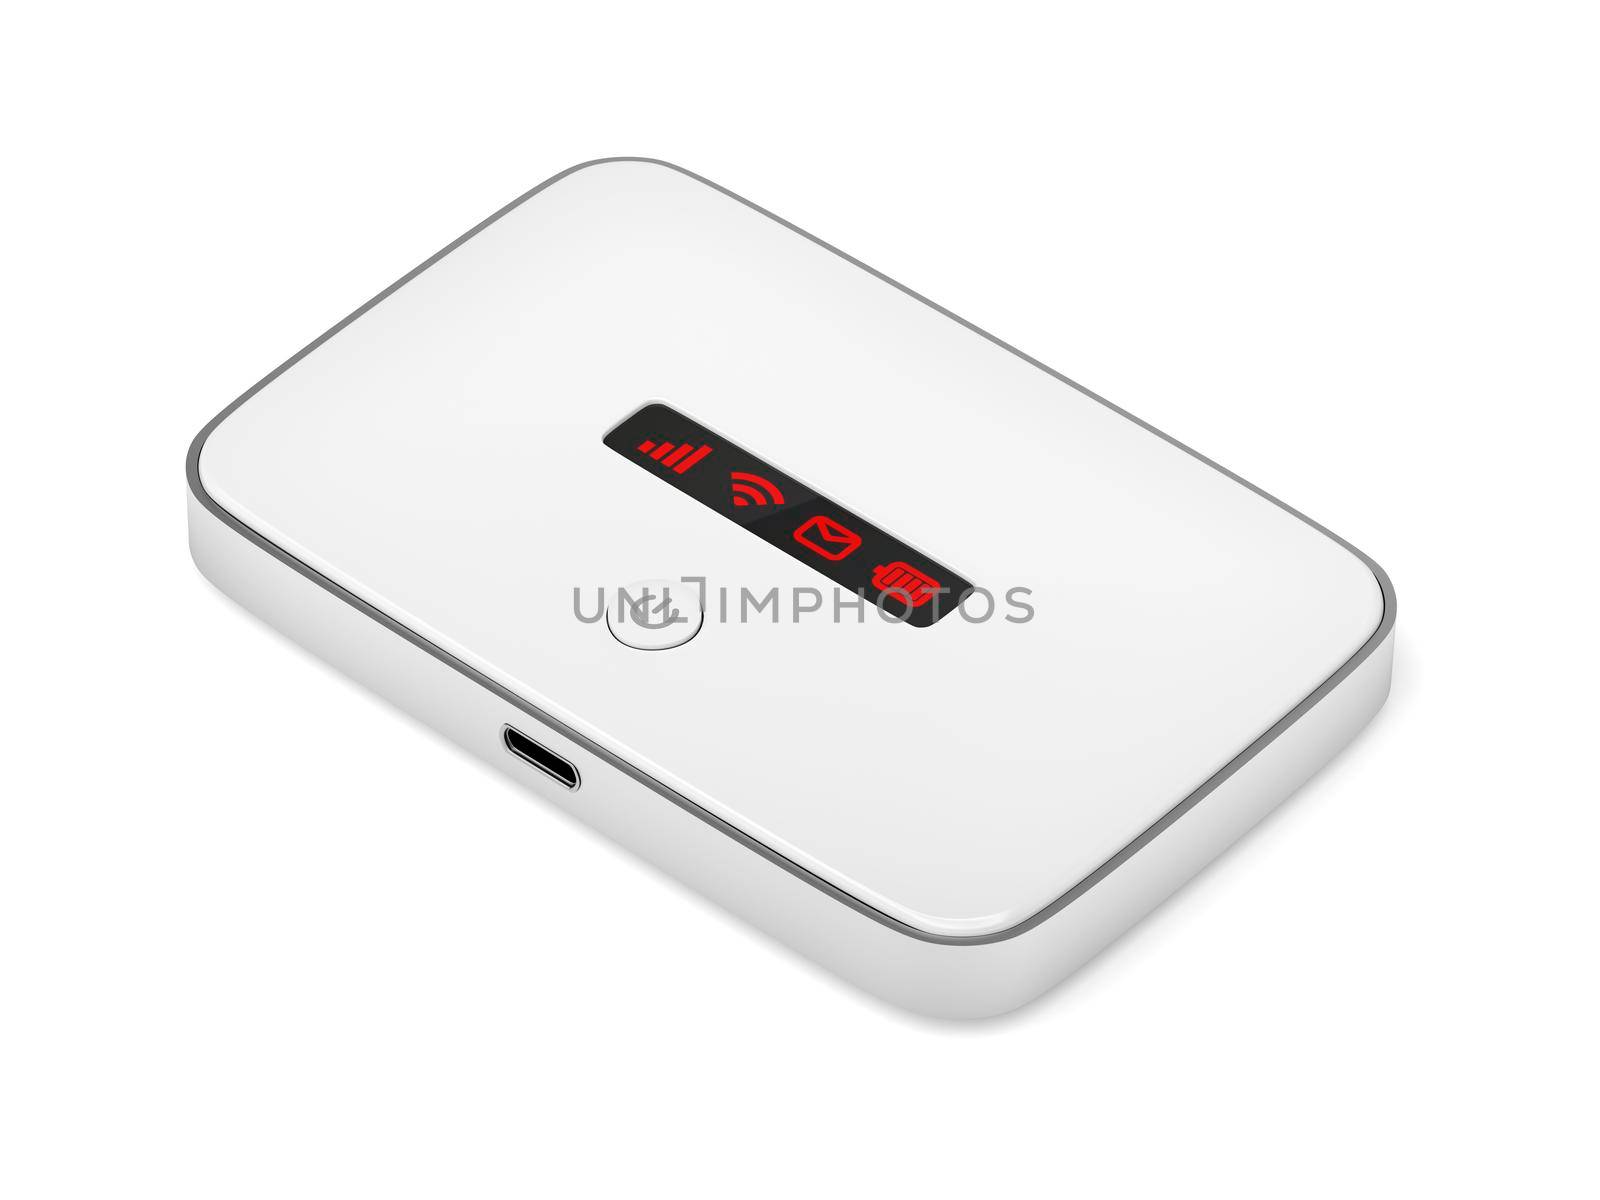 Mobile wifi router by magraphics